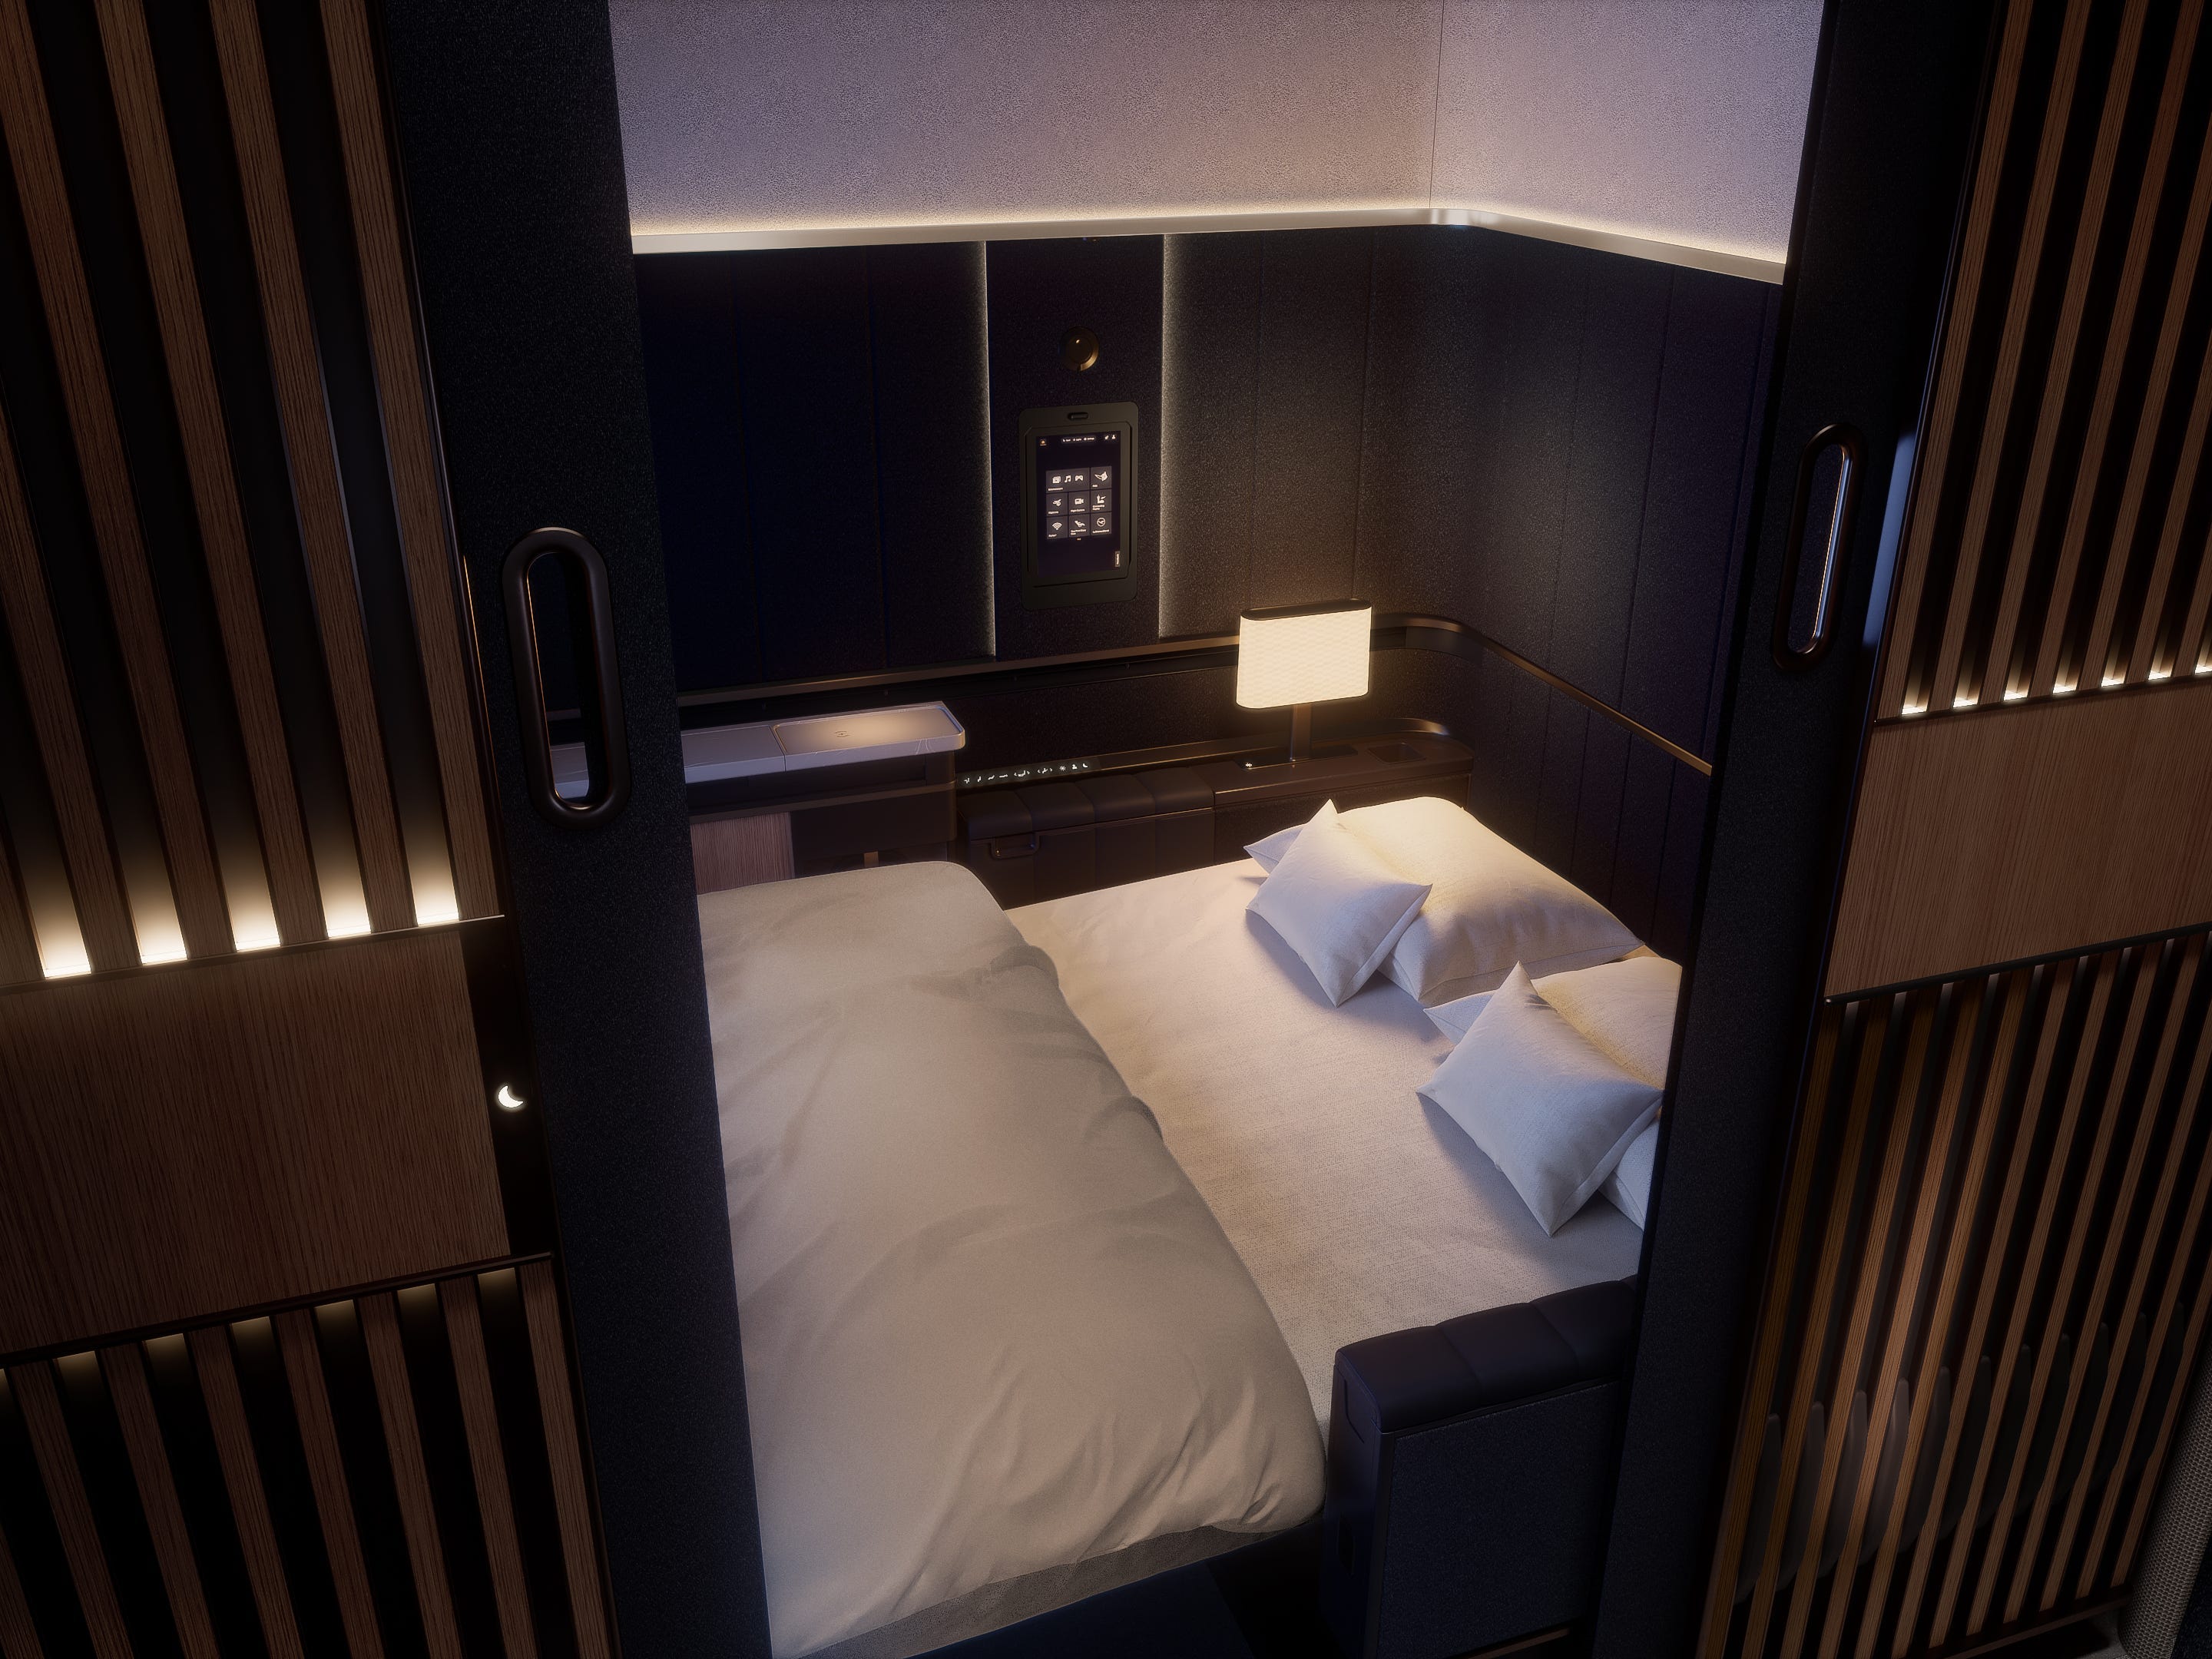 <p>Lufthansa <a href="https://www.lufthansagroup.com/en/newsroom/releases/lufthansa-presents-new-first-class-suite-plus-private-room-above-the-clouds.html">said</a> in a March 2023 press release that the ceiling-high walls, 40 square feet of space, and the fully closable door in first class convey the "feeling of privacy and individuality similar to a hotel room."</p><p>The cabin includes single suites and double suites, the latter is dubbed "Suite Plus" and is set to feature a wide couch that converts into a double bed big enough for two people.</p>